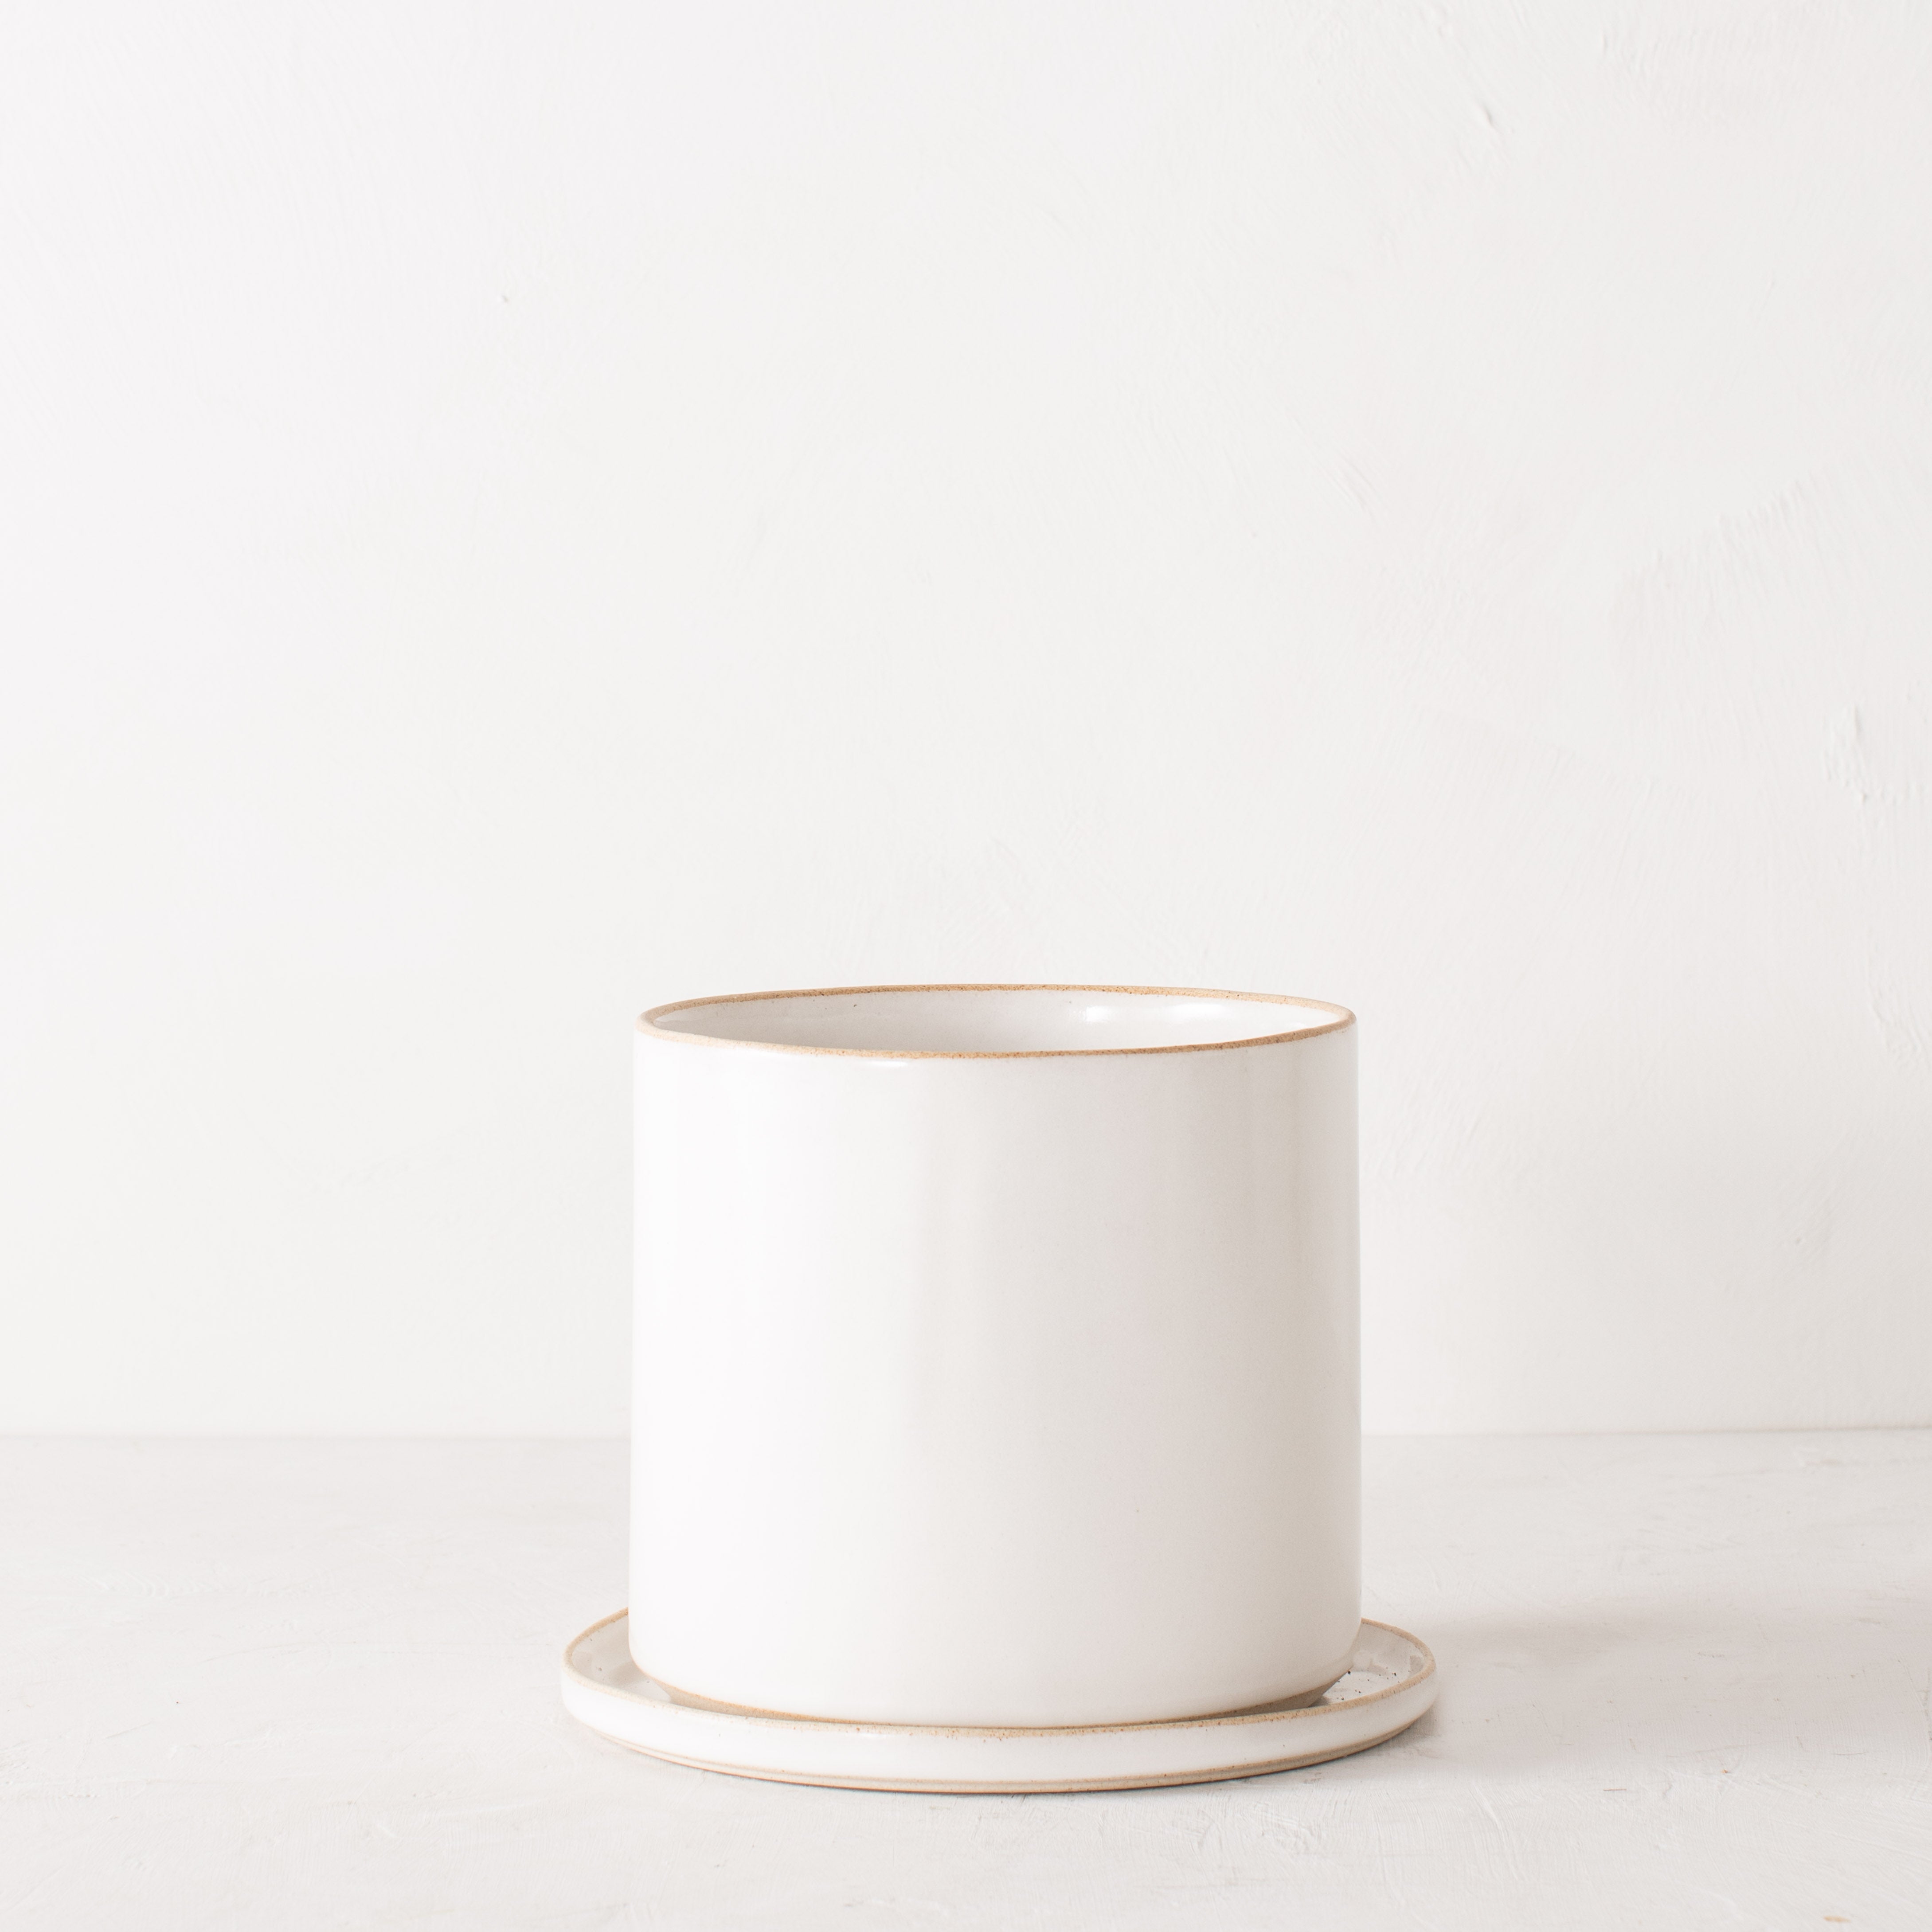 8 inch white ceramic planter with a bottom drainage dishes. Staged on a white plaster textured tabletop against a plaster textured white wall. Designed and sold by Convivial Production, Kansas City Ceramics.